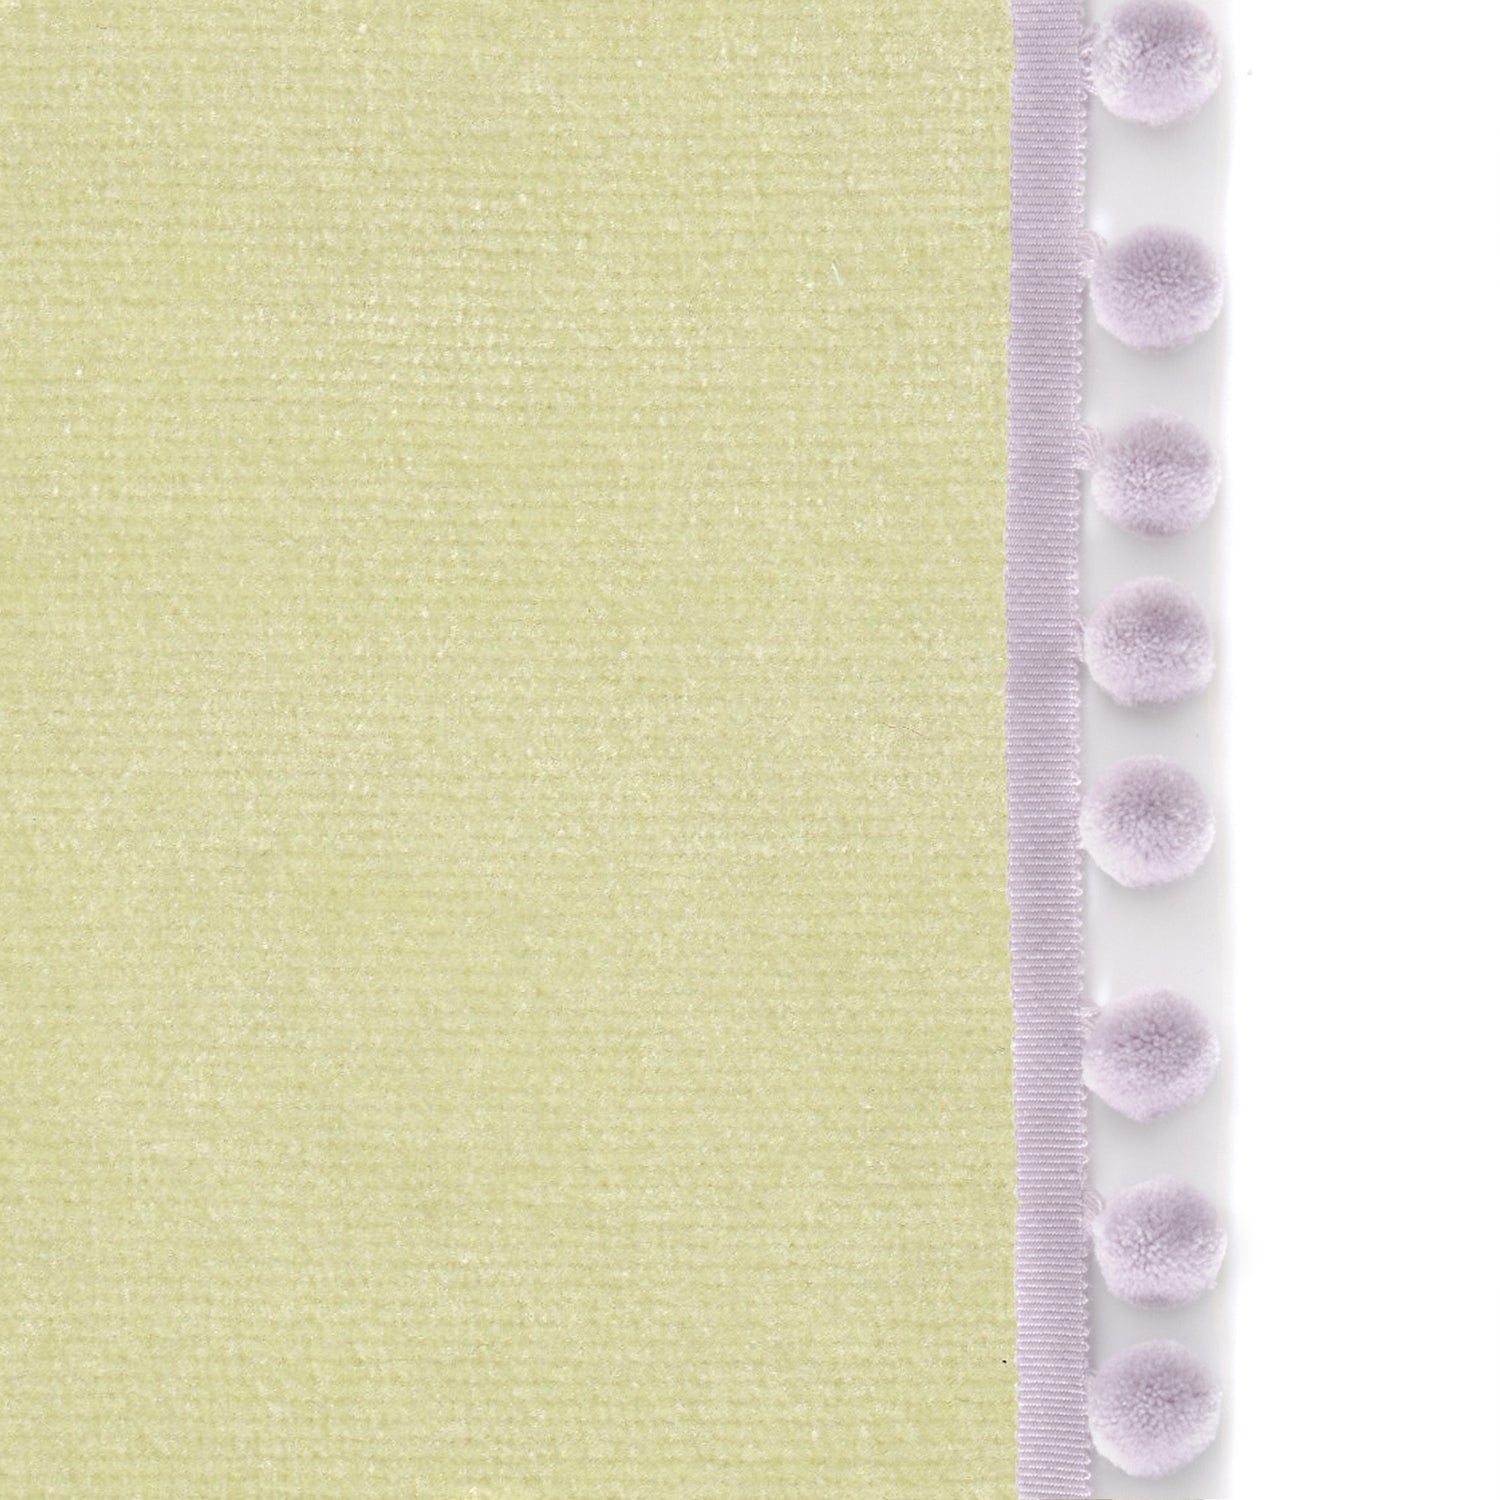 Upclose picture of Pear Velvet custom curtain with lilac pom pom trim